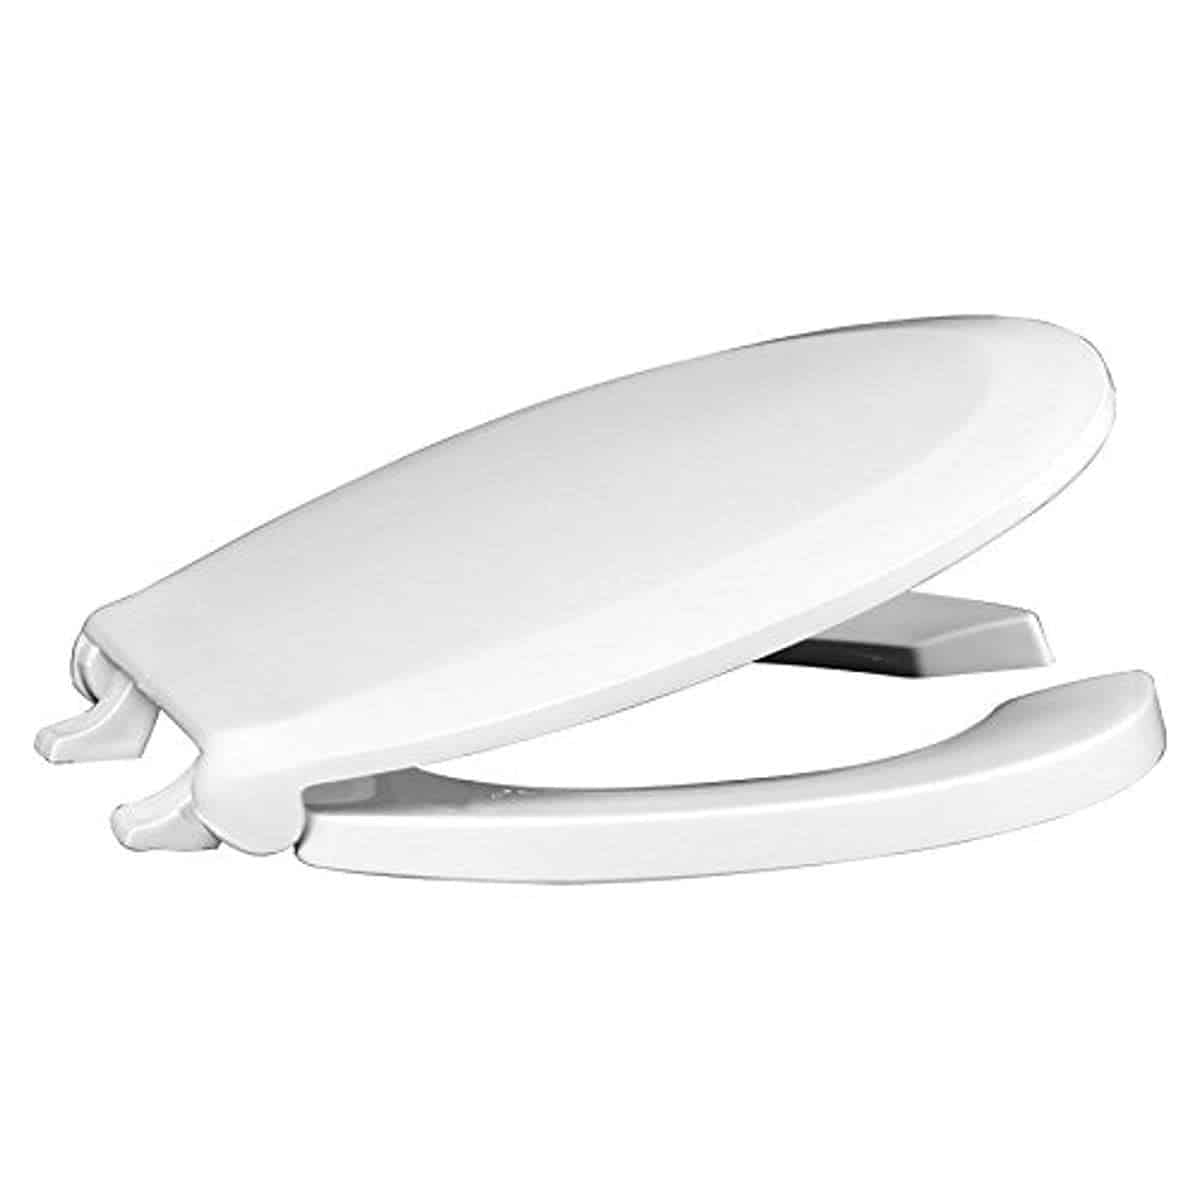 Centoco 460STS-001 Round Plastic Toilet Seat, Open Front with Cover, Stainless Steel Hinge, Heavy Duty Commercial Use, White